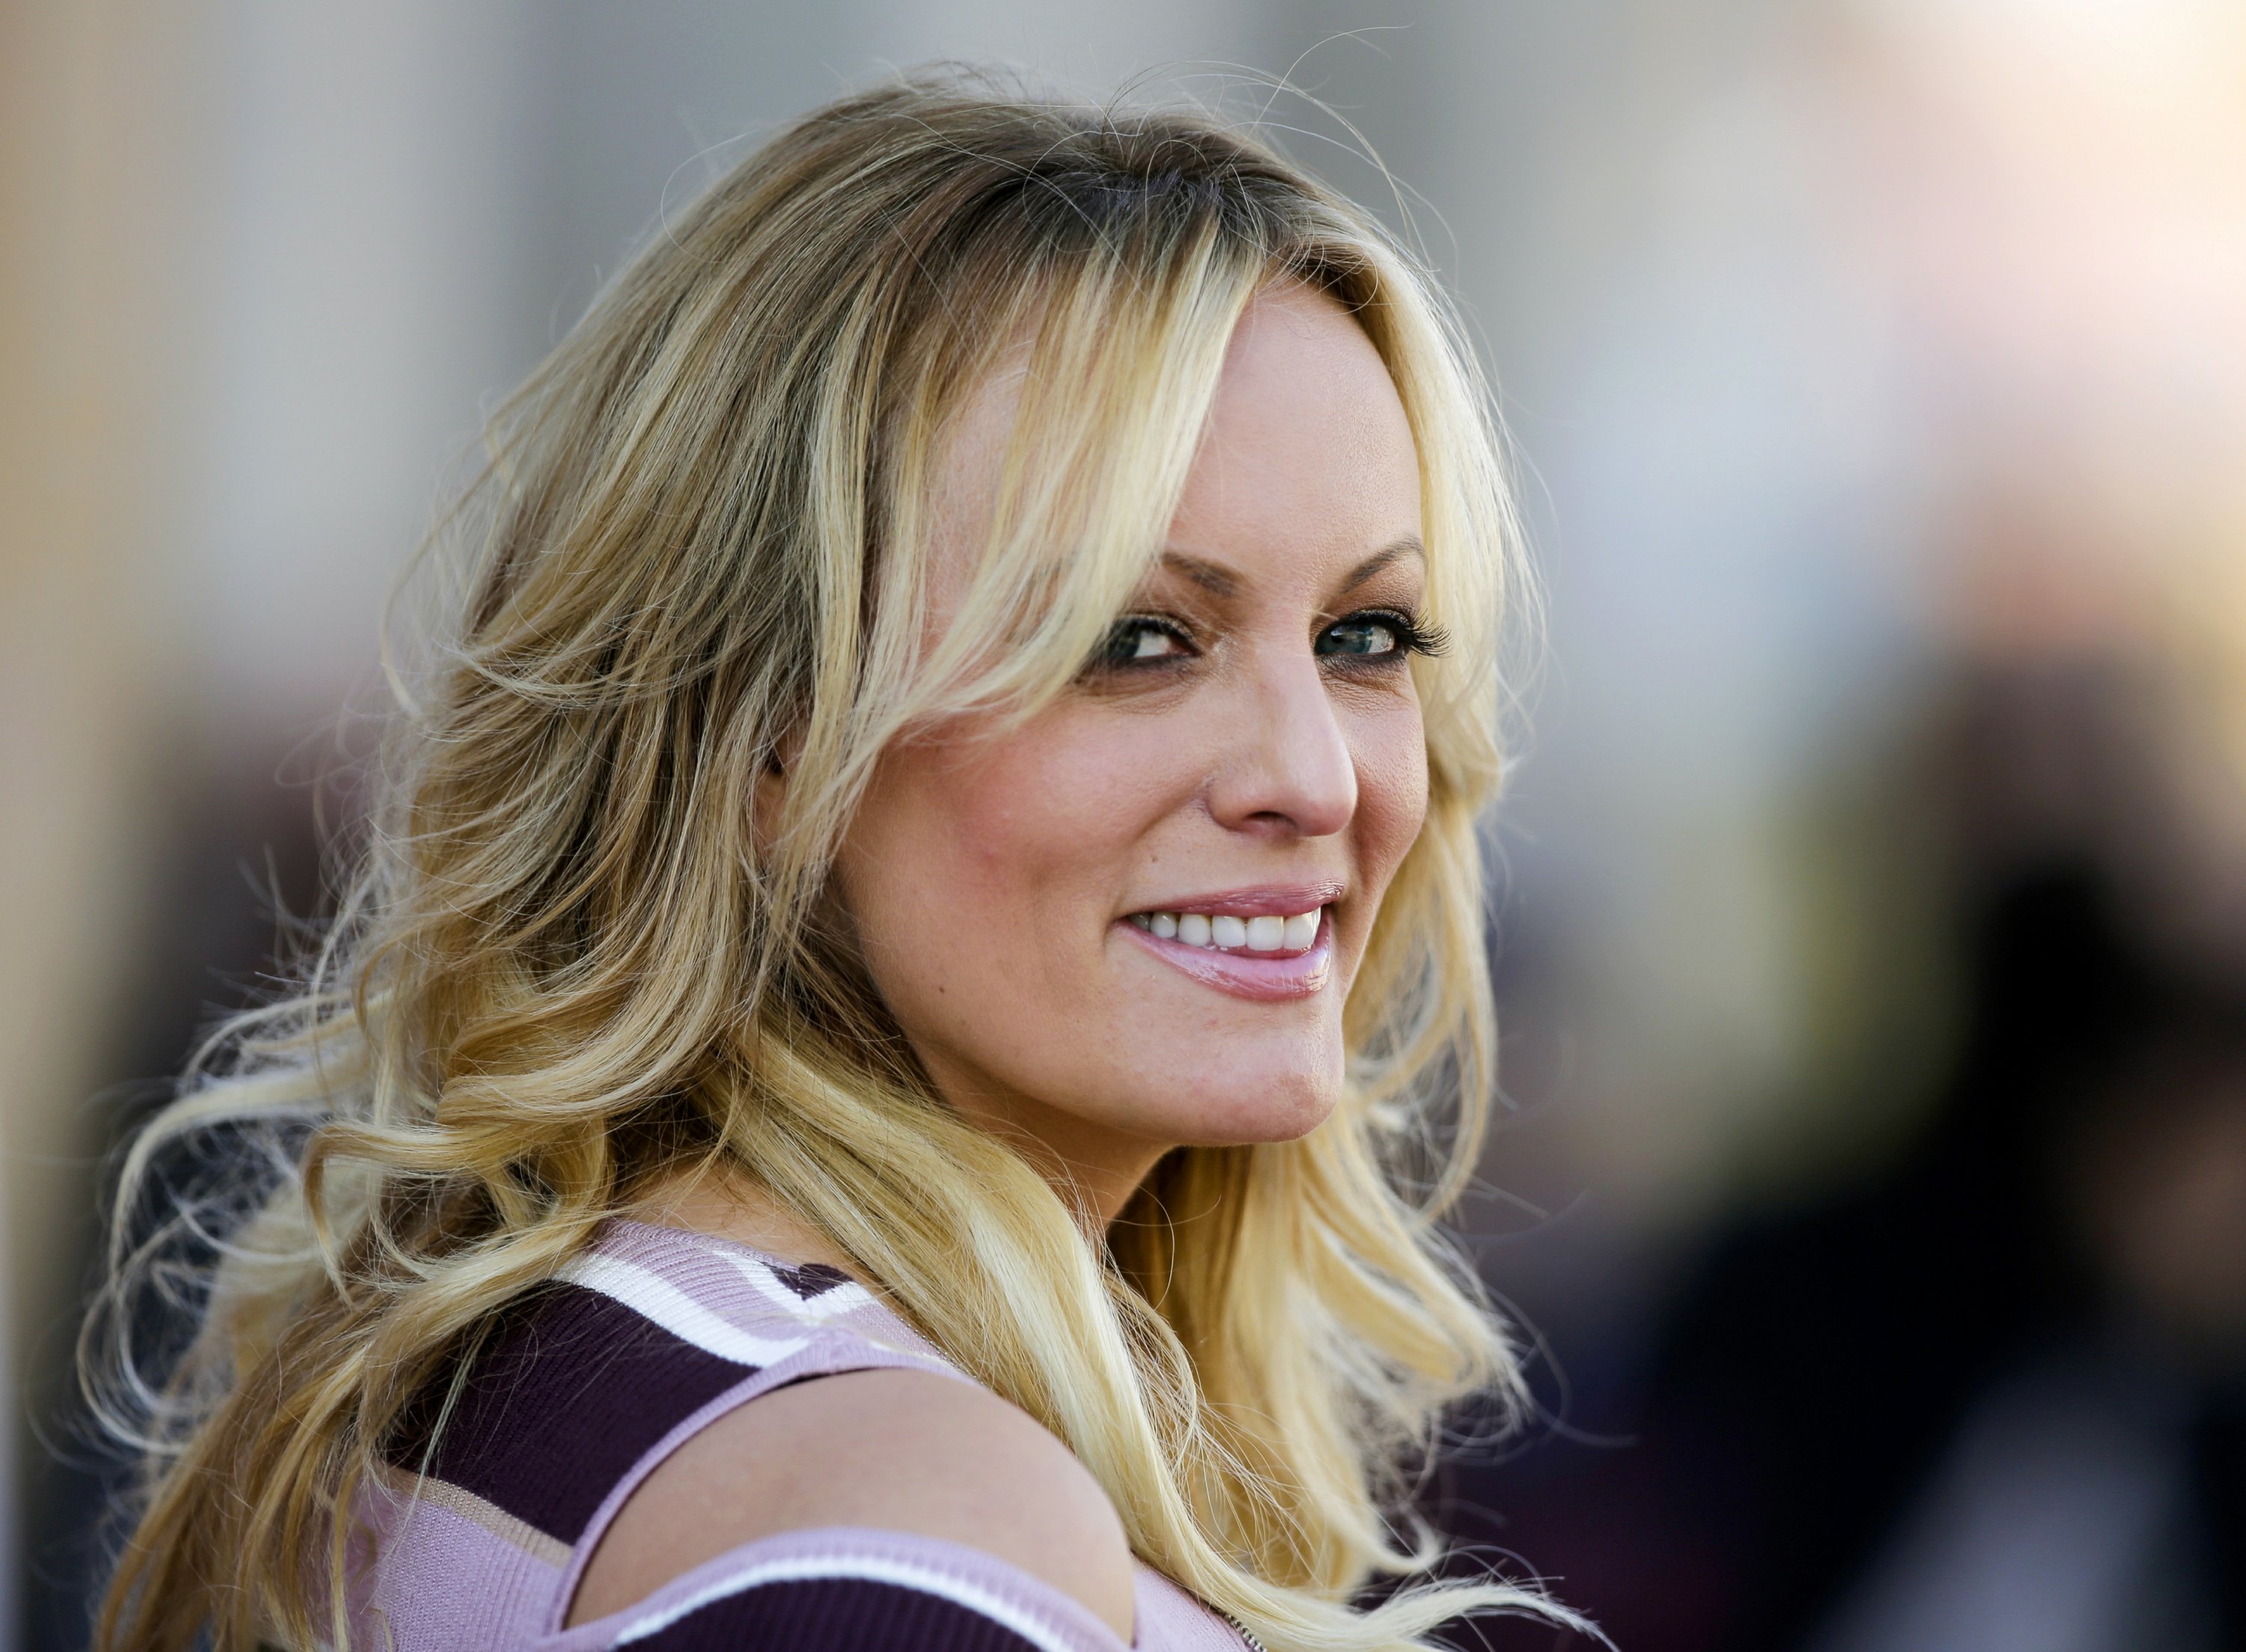 Arrested Women - City to pay Stormy Daniels $450,000 over strip club arrest